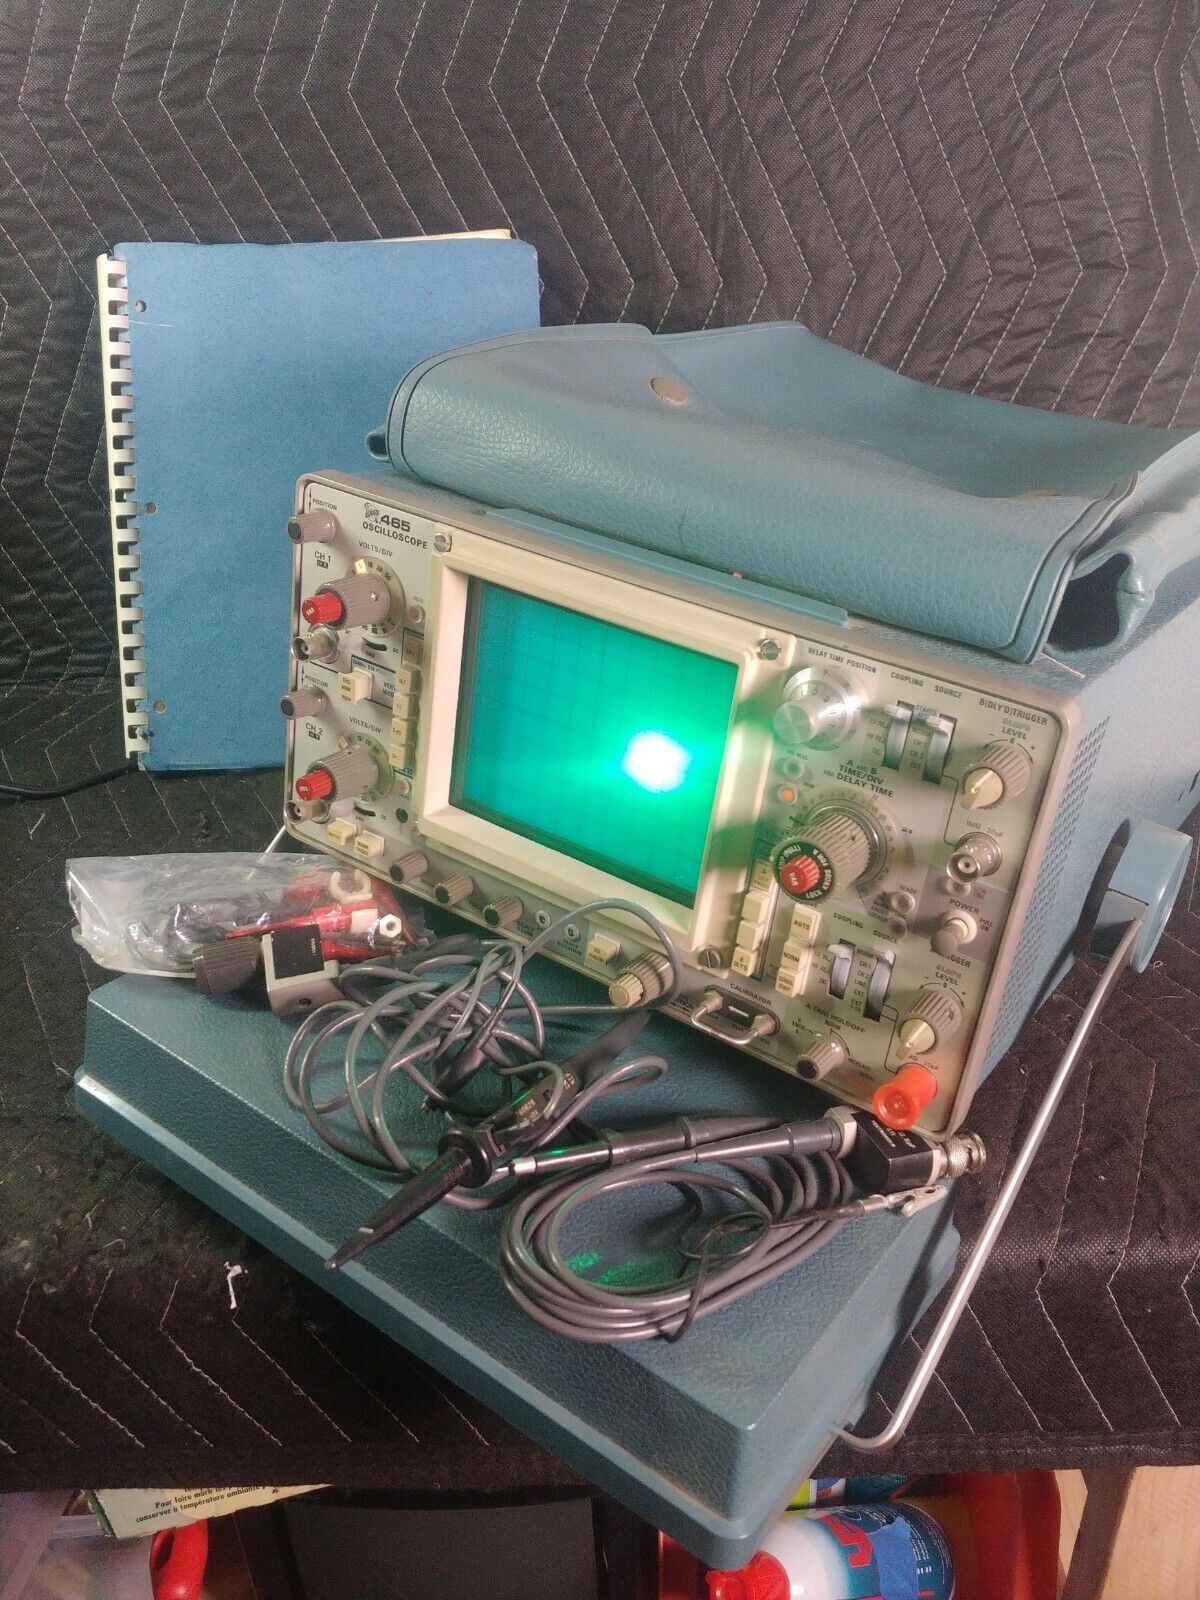 Tektronix 465 100 MHz, Dual-channel Oscilloscope w/ Probes and Manual